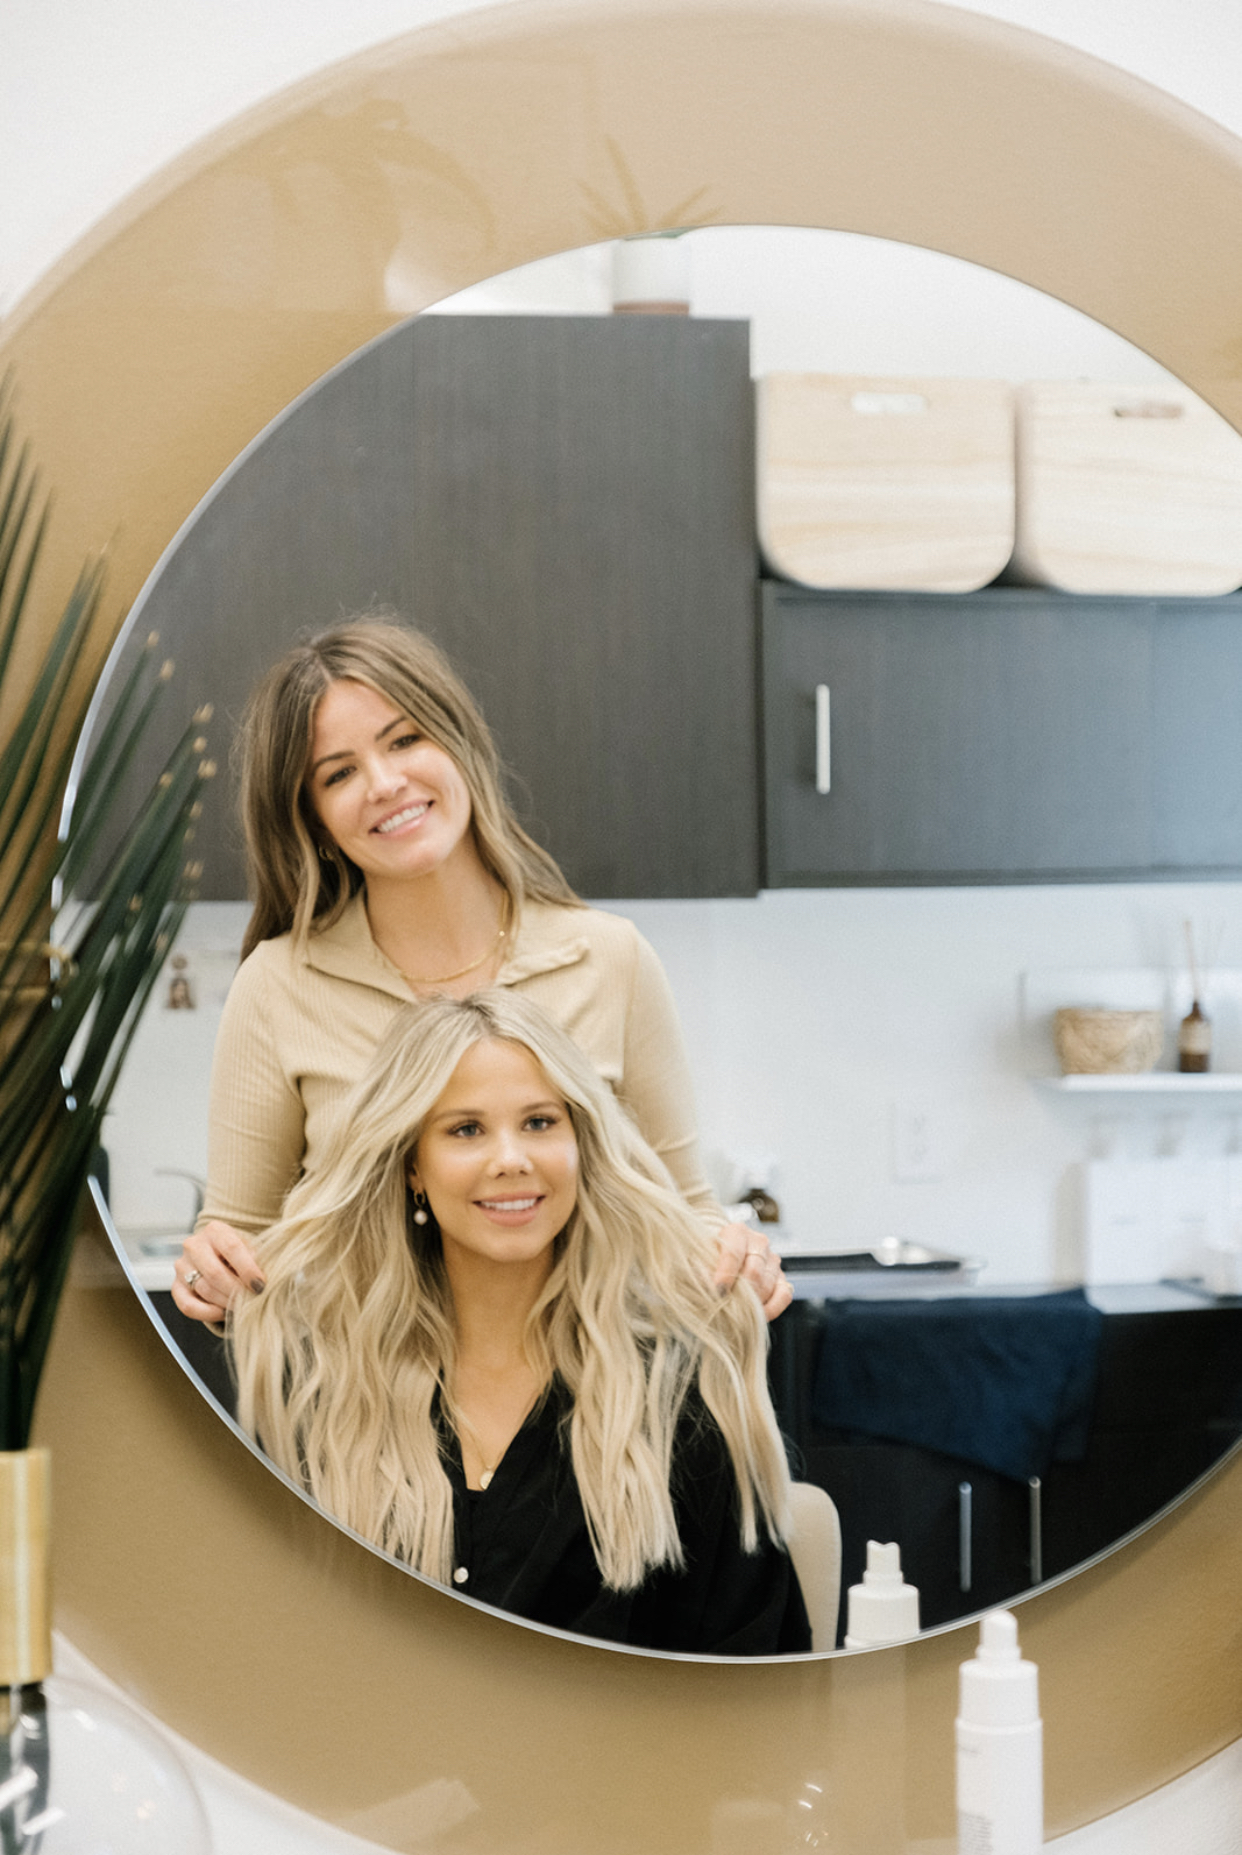 Deciding to get long blonde hand tied hair extensions? See the hair extensions before and after from a Florida hair stylist! #hairextensions #handtiedextensions #blondehair